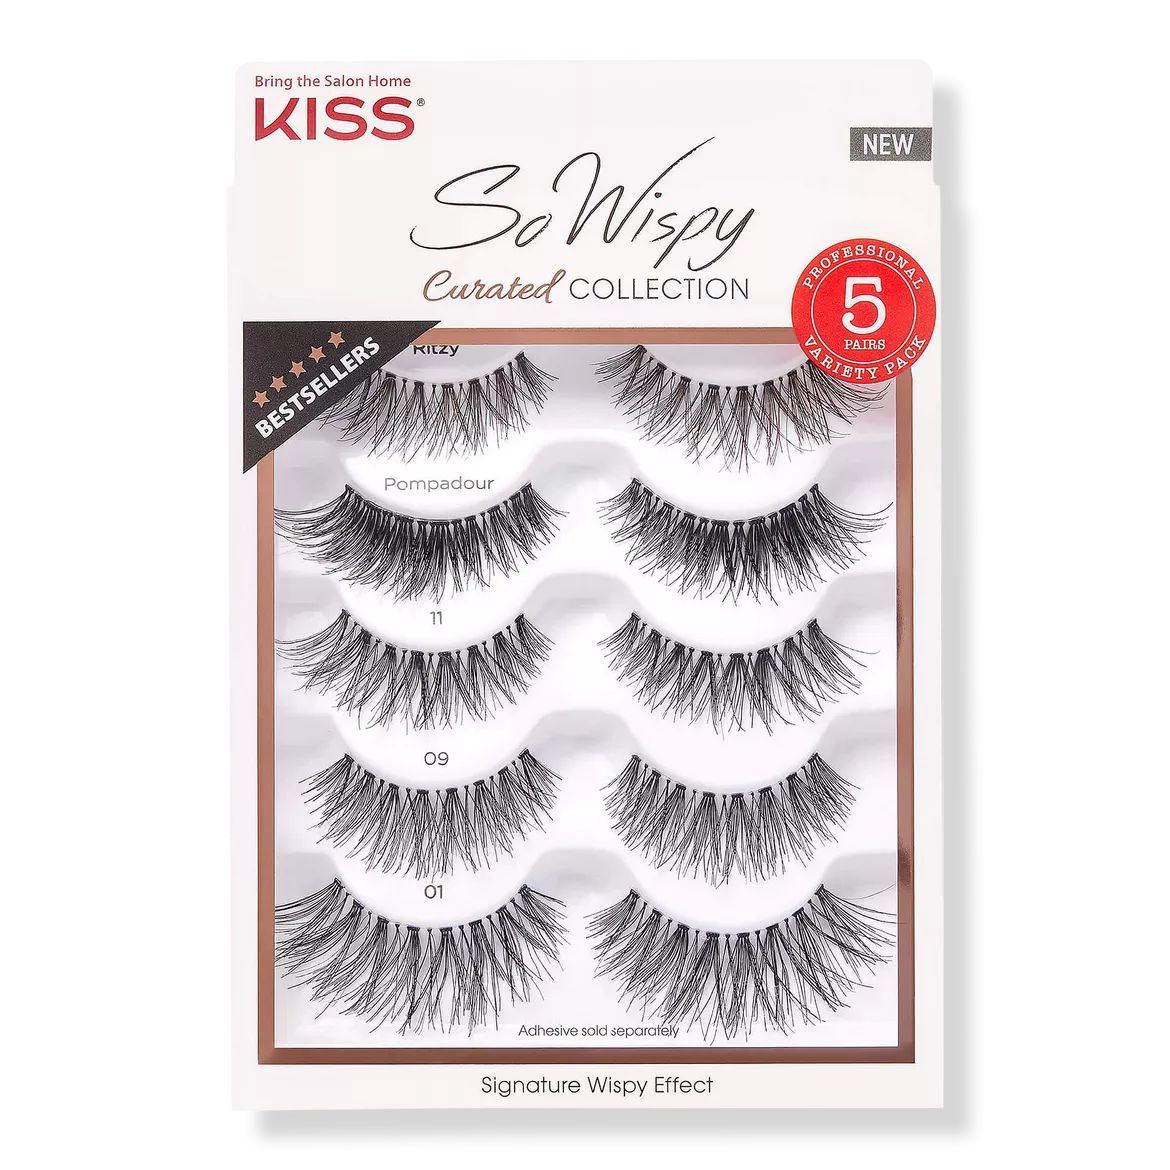 So Wispy Curated Bestsellers Lash Collection | Ulta